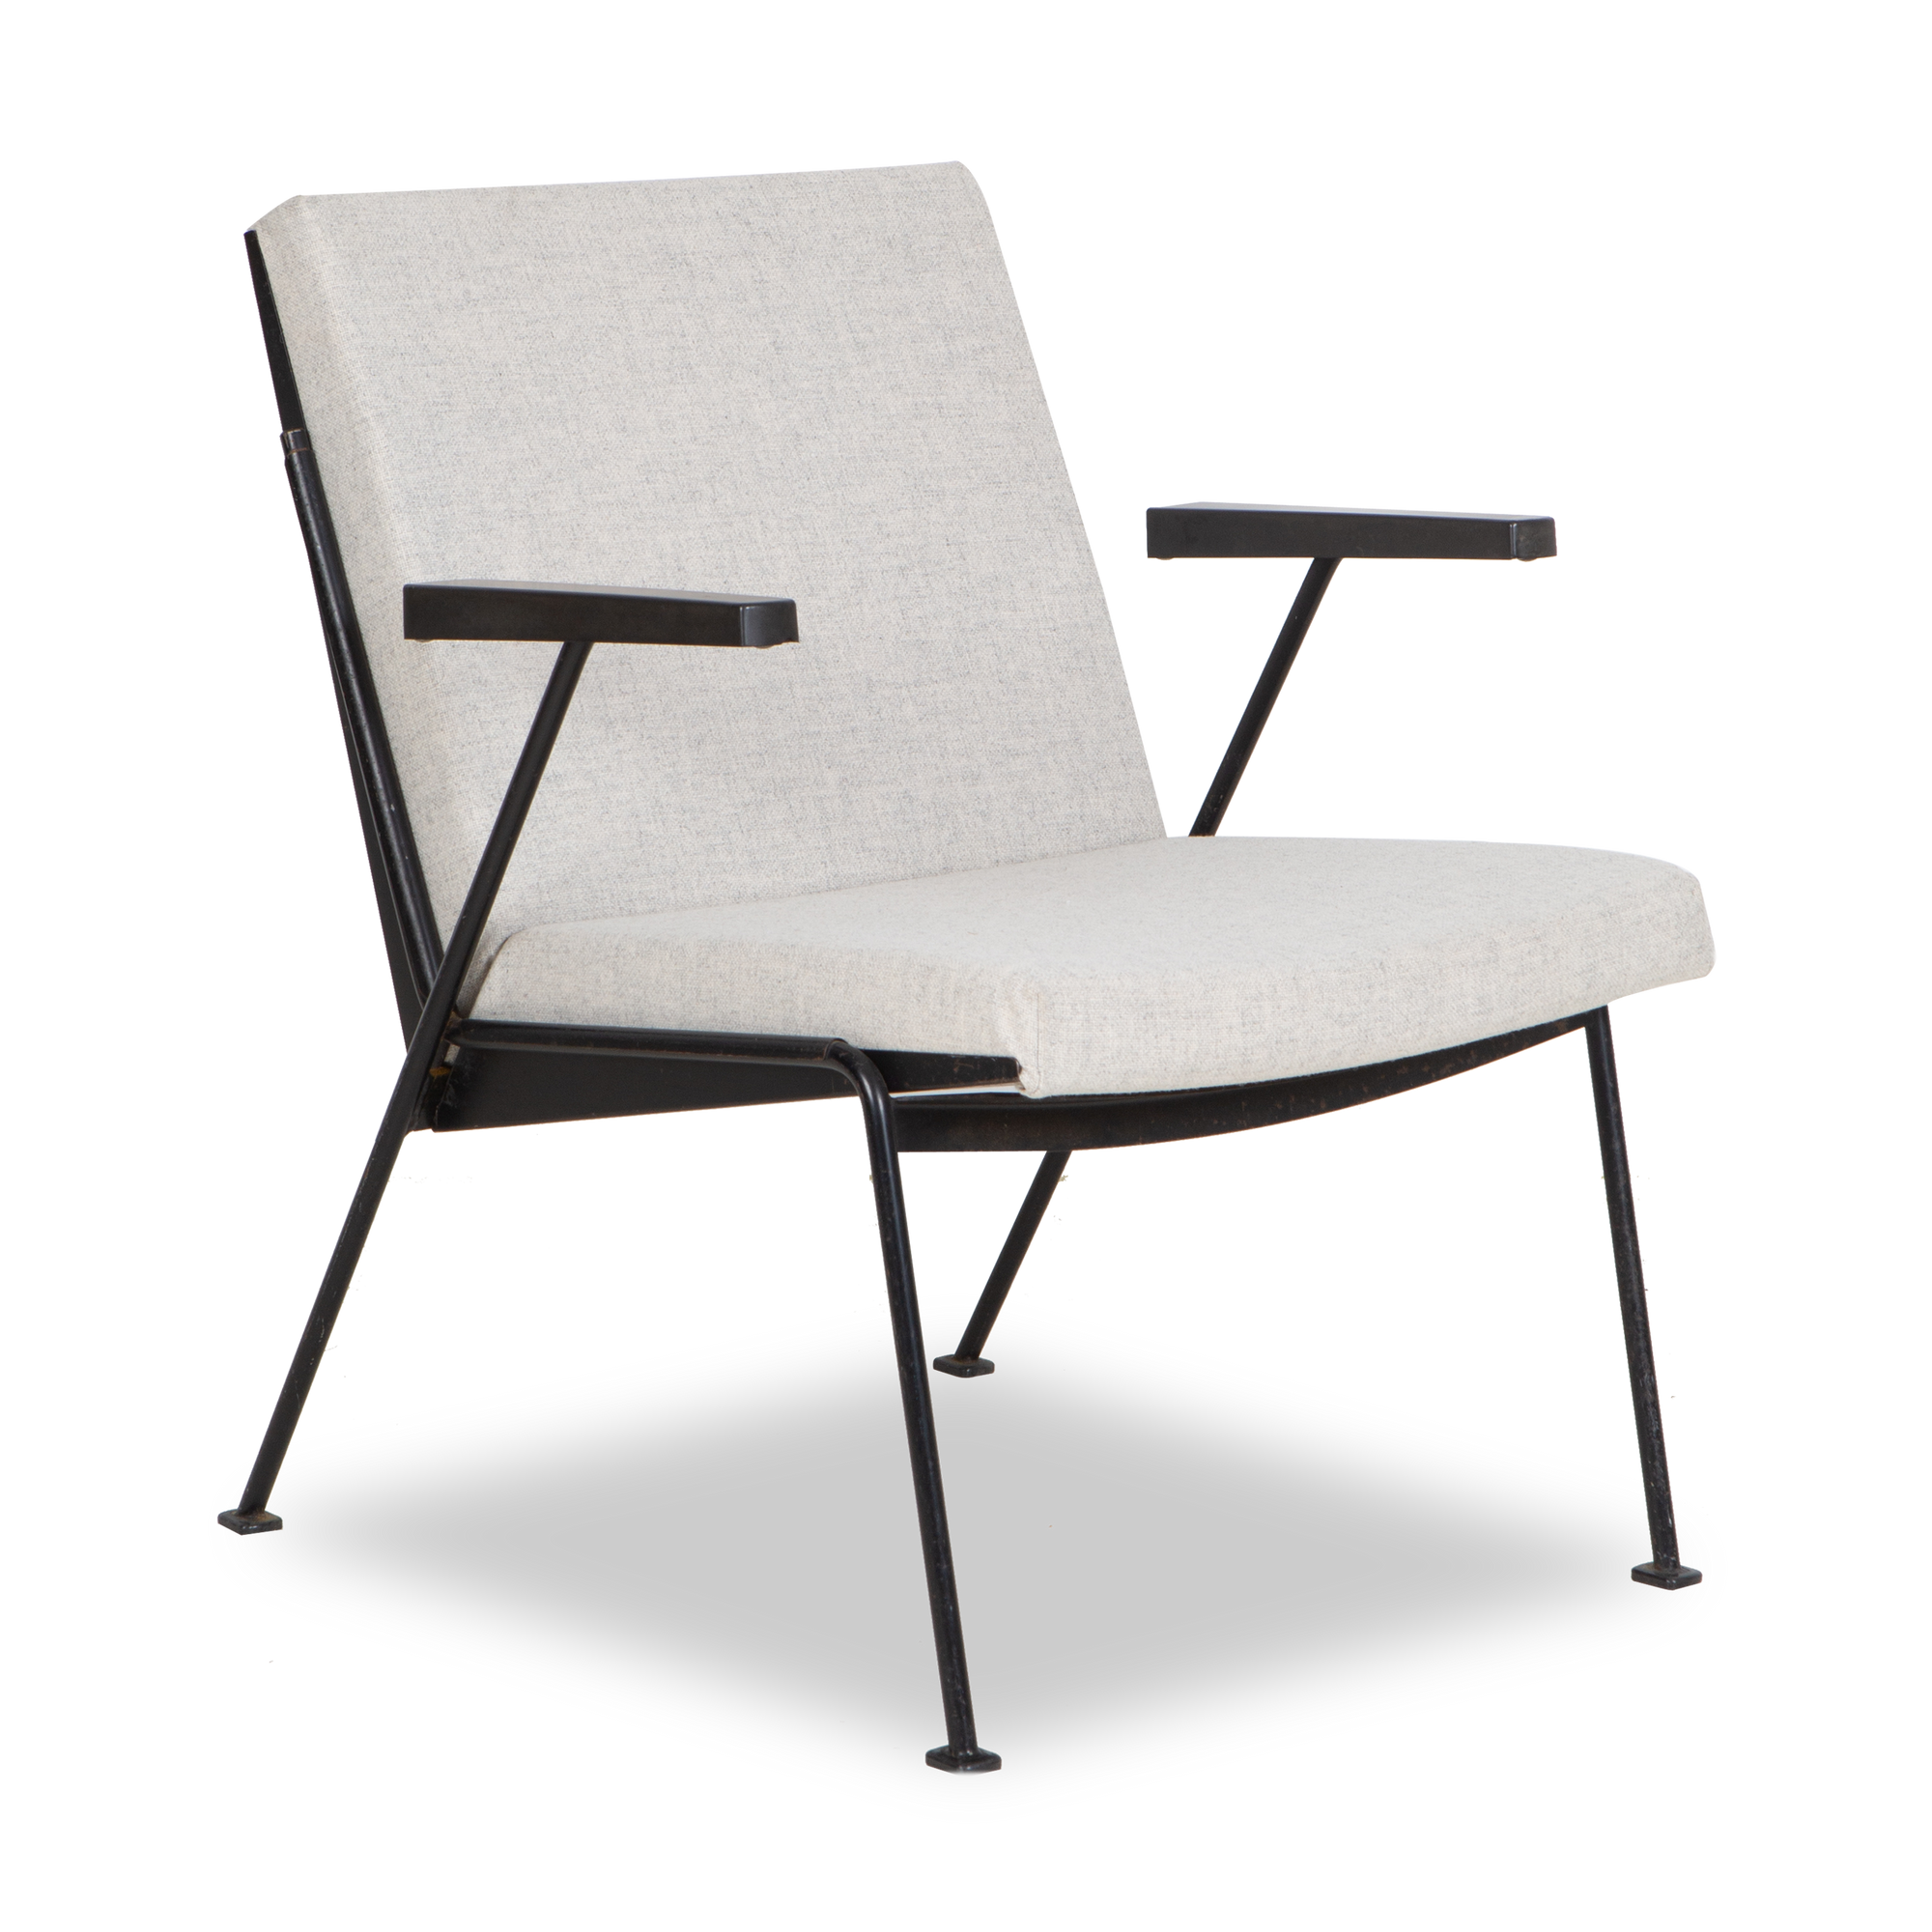 A chic display of the Bauhaus style, this Vintage Oase Lounge Chair was designed by Wim Rietveld for Gispen, circa 1950s.